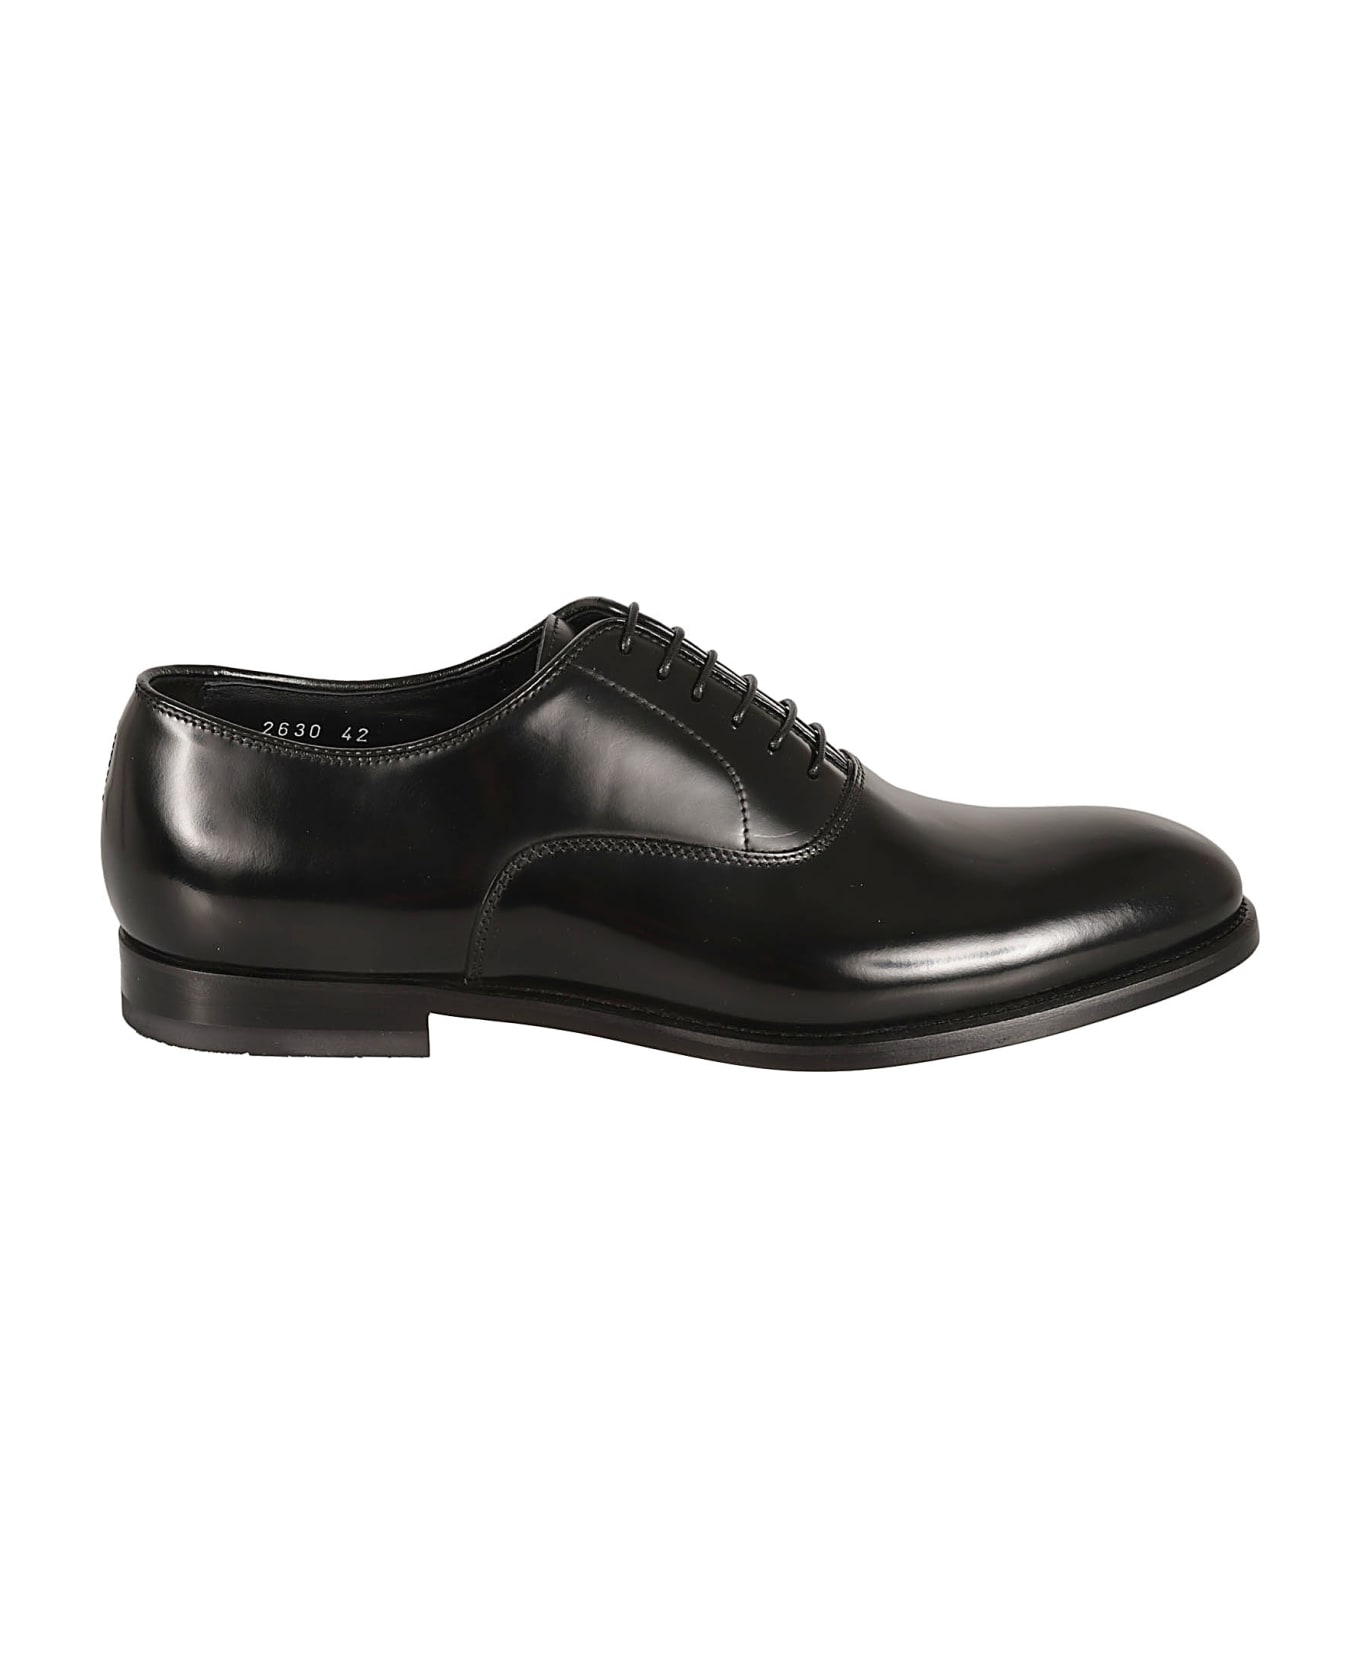 Doucal's Shiny Classic Oxford Shoes - Black